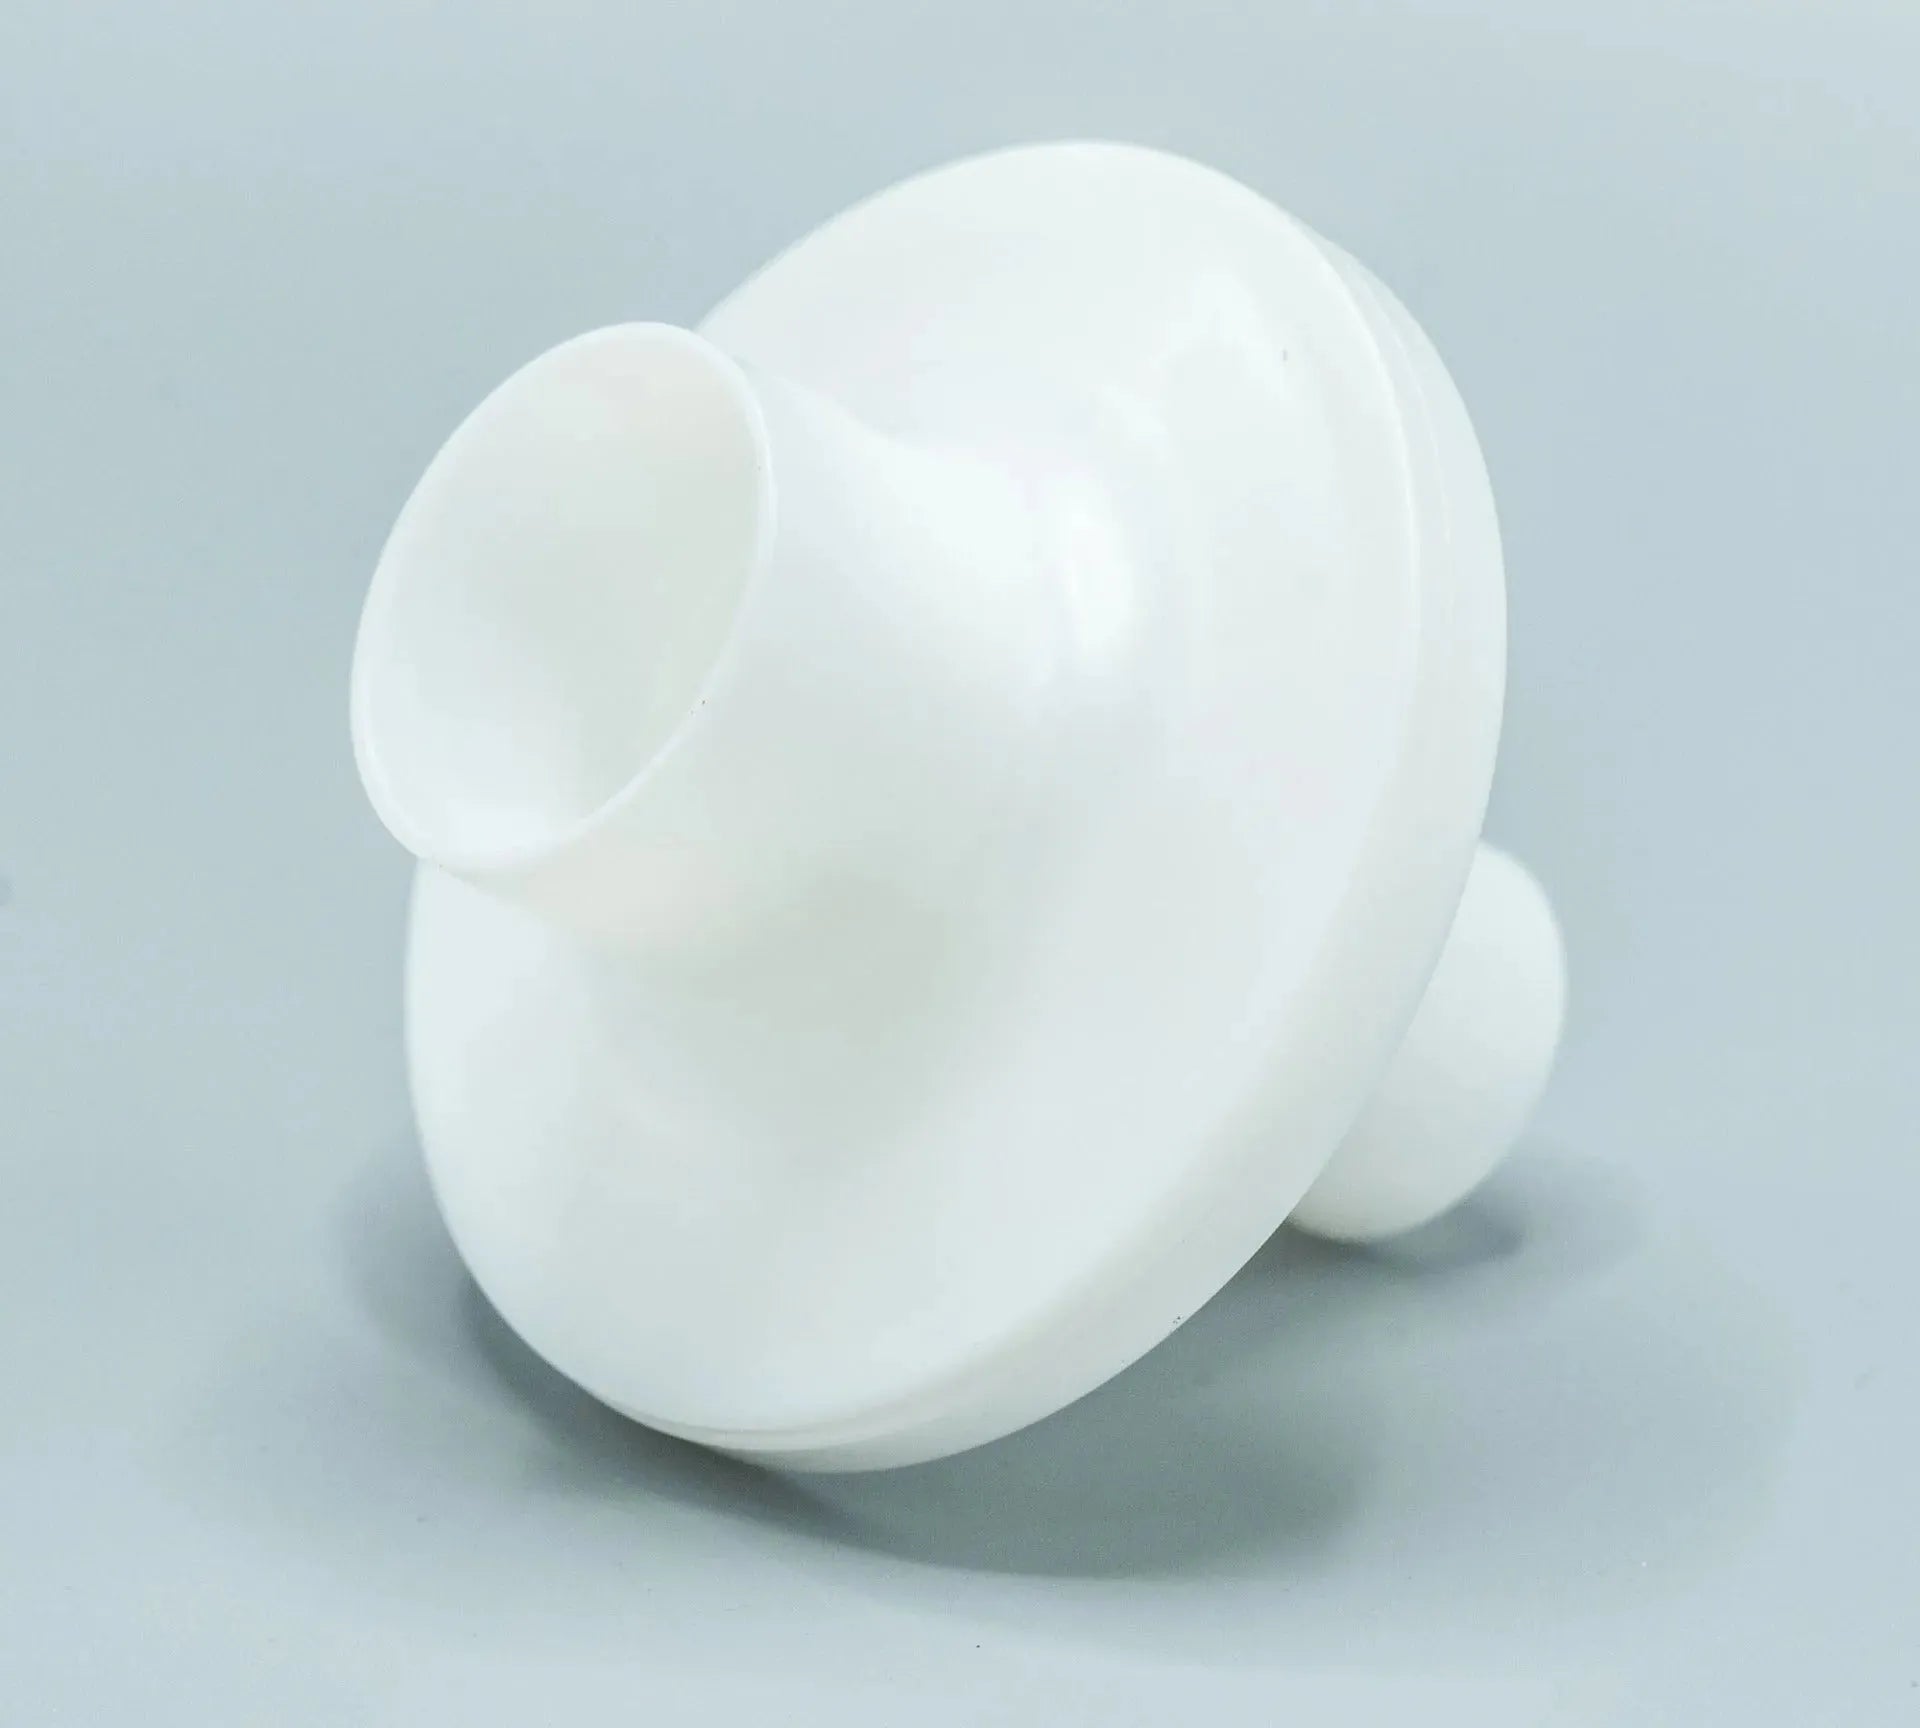 The Polytechnic Round bacterial viral filter is round in shape and white in color.